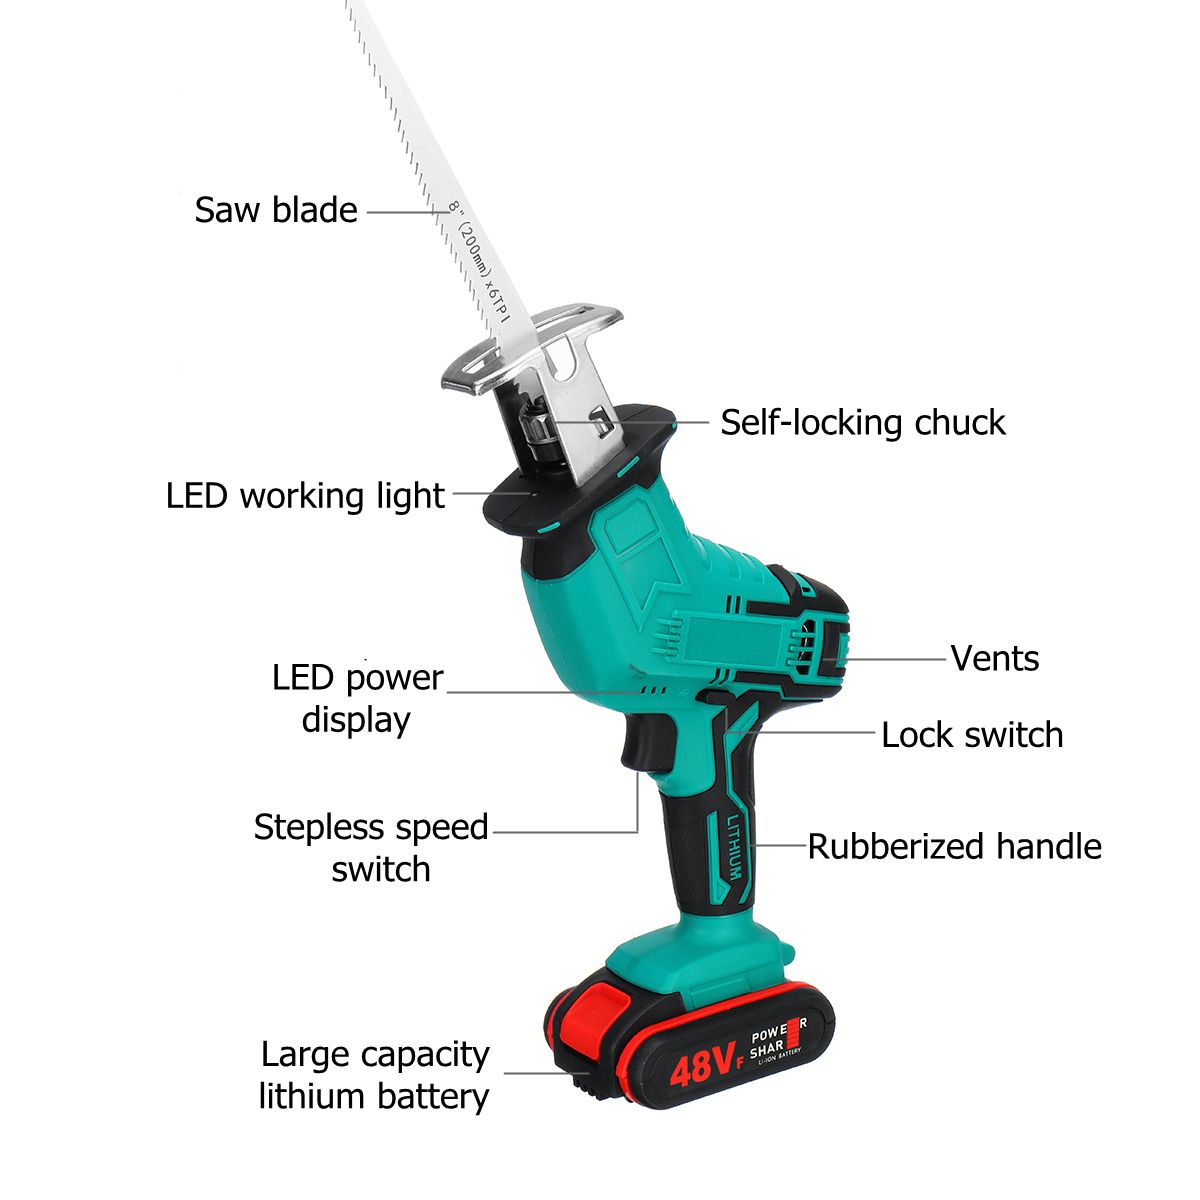 Electric-Cordless-Reciprocating-Saw-4-Blades-Battery-Charger-Saw-Power-Tool-1732002